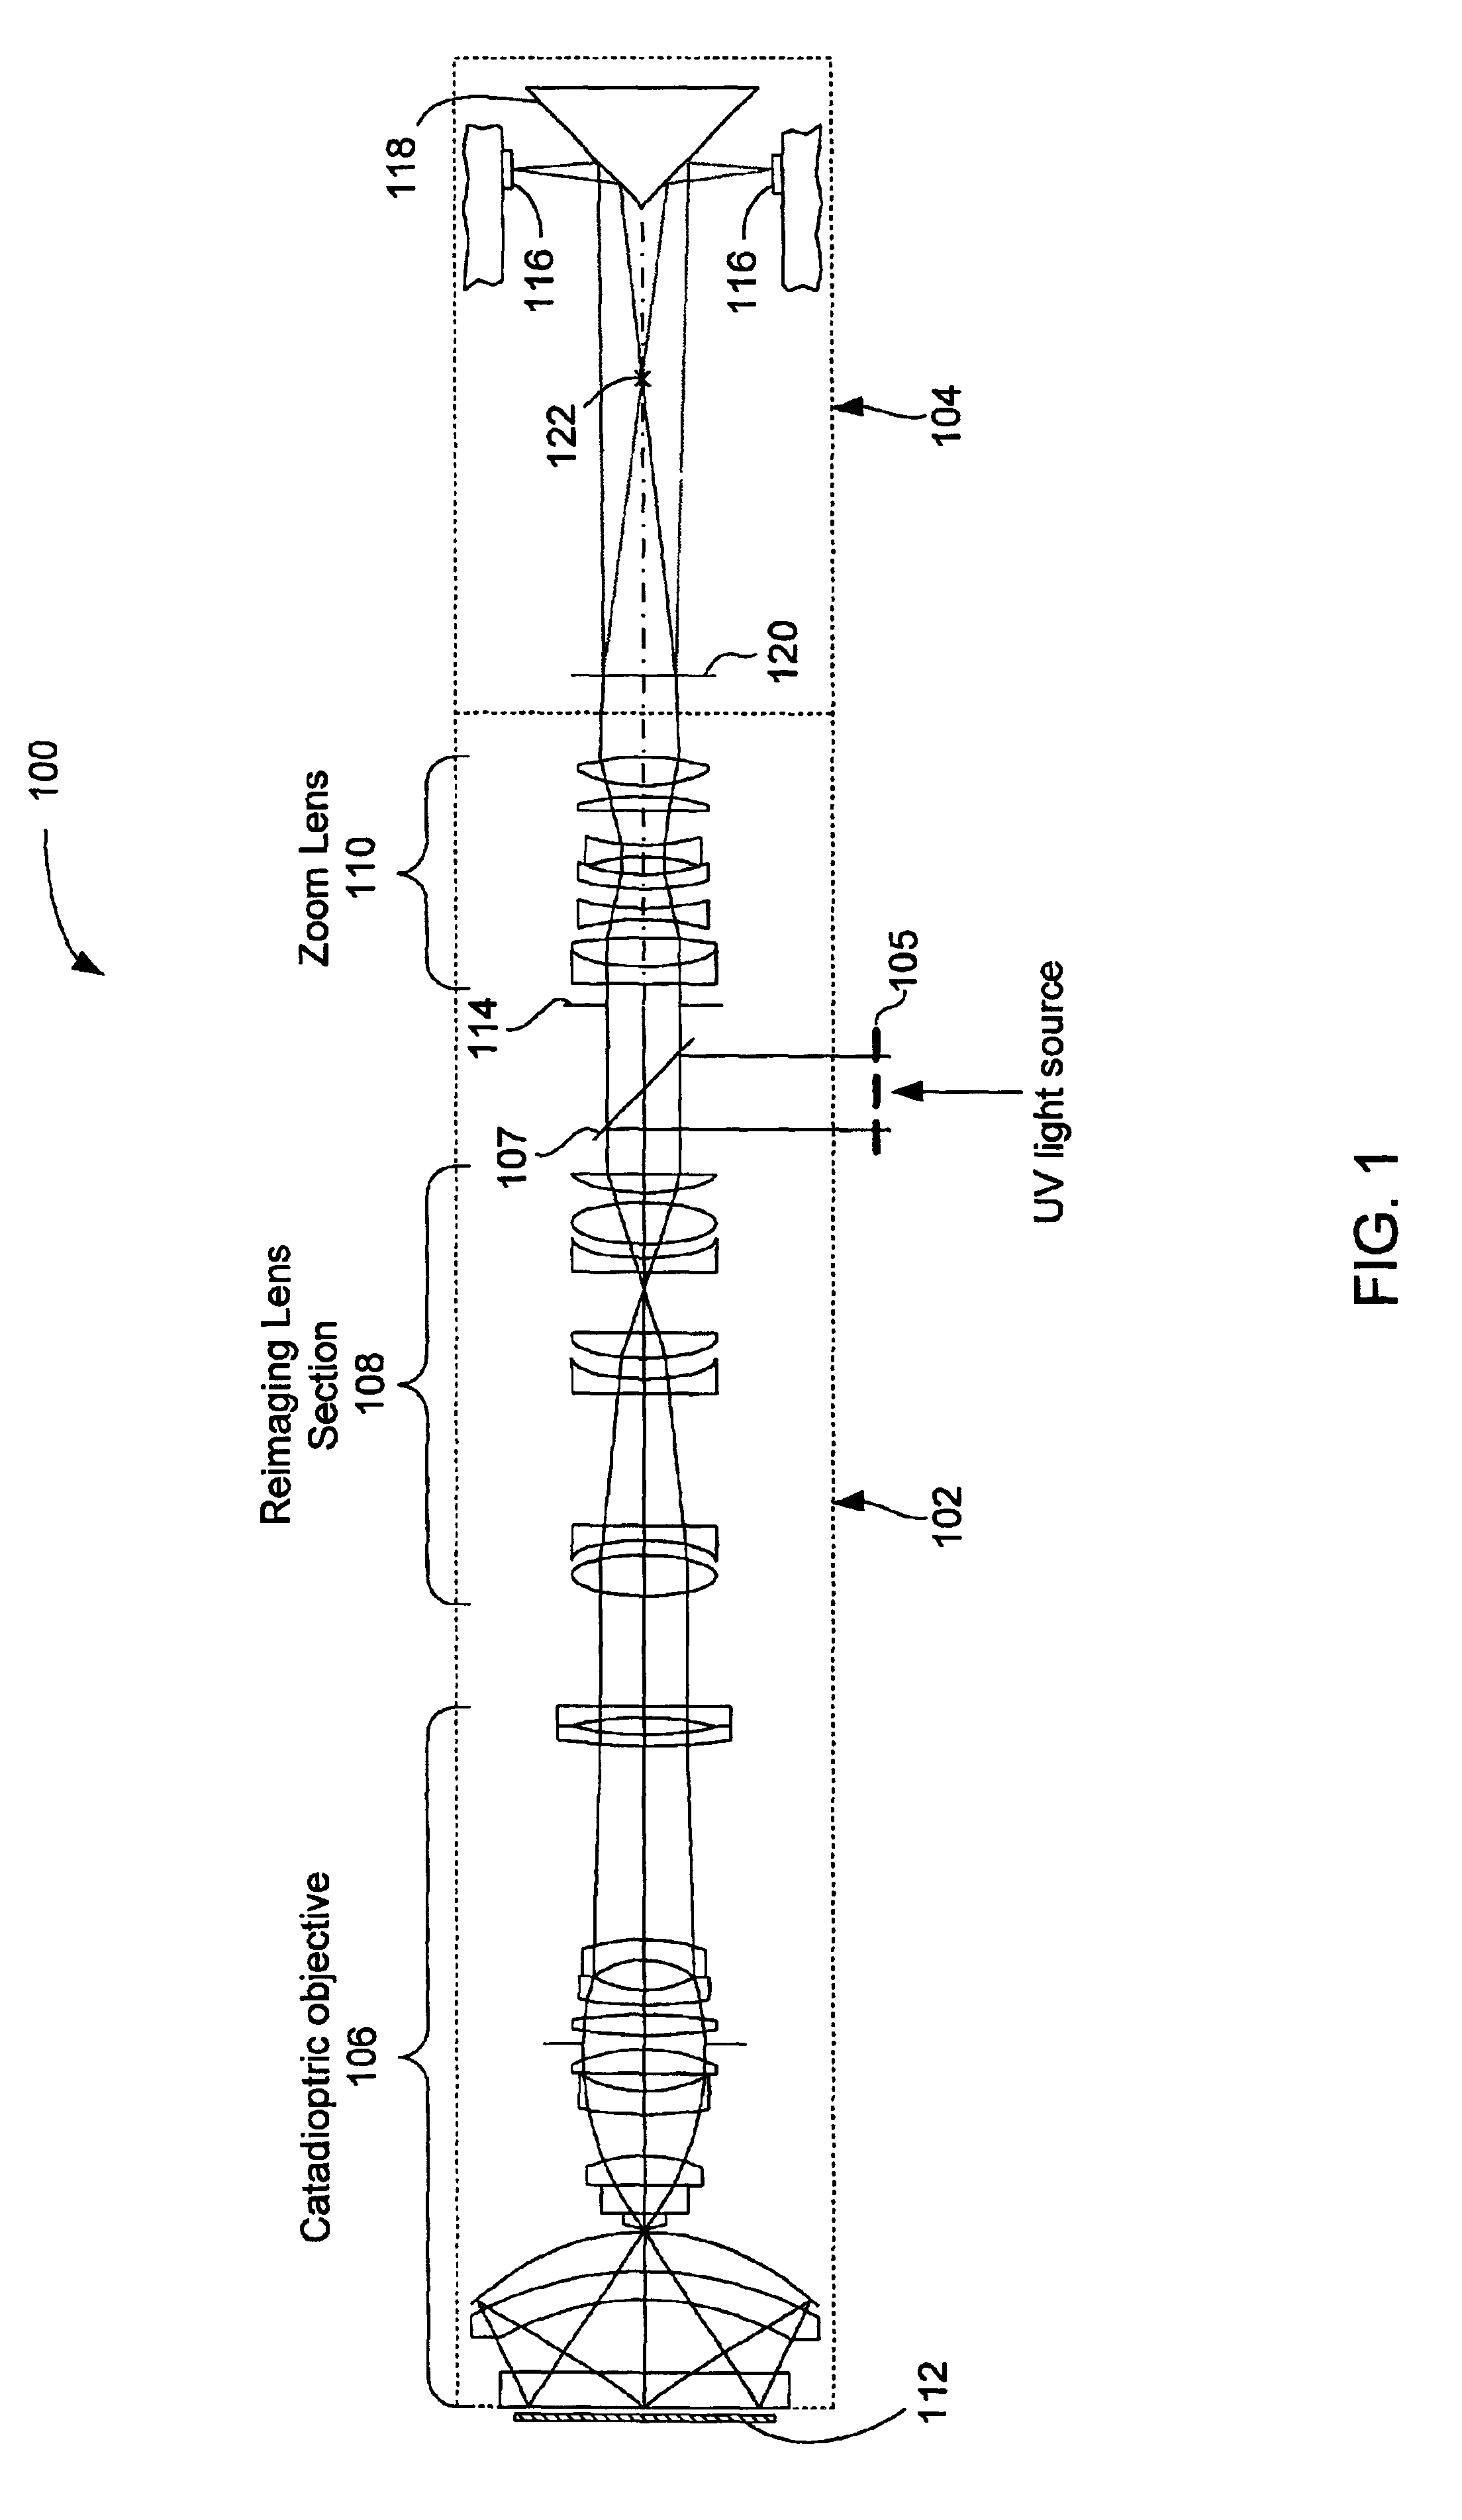 Multi-detector microscopic inspection system